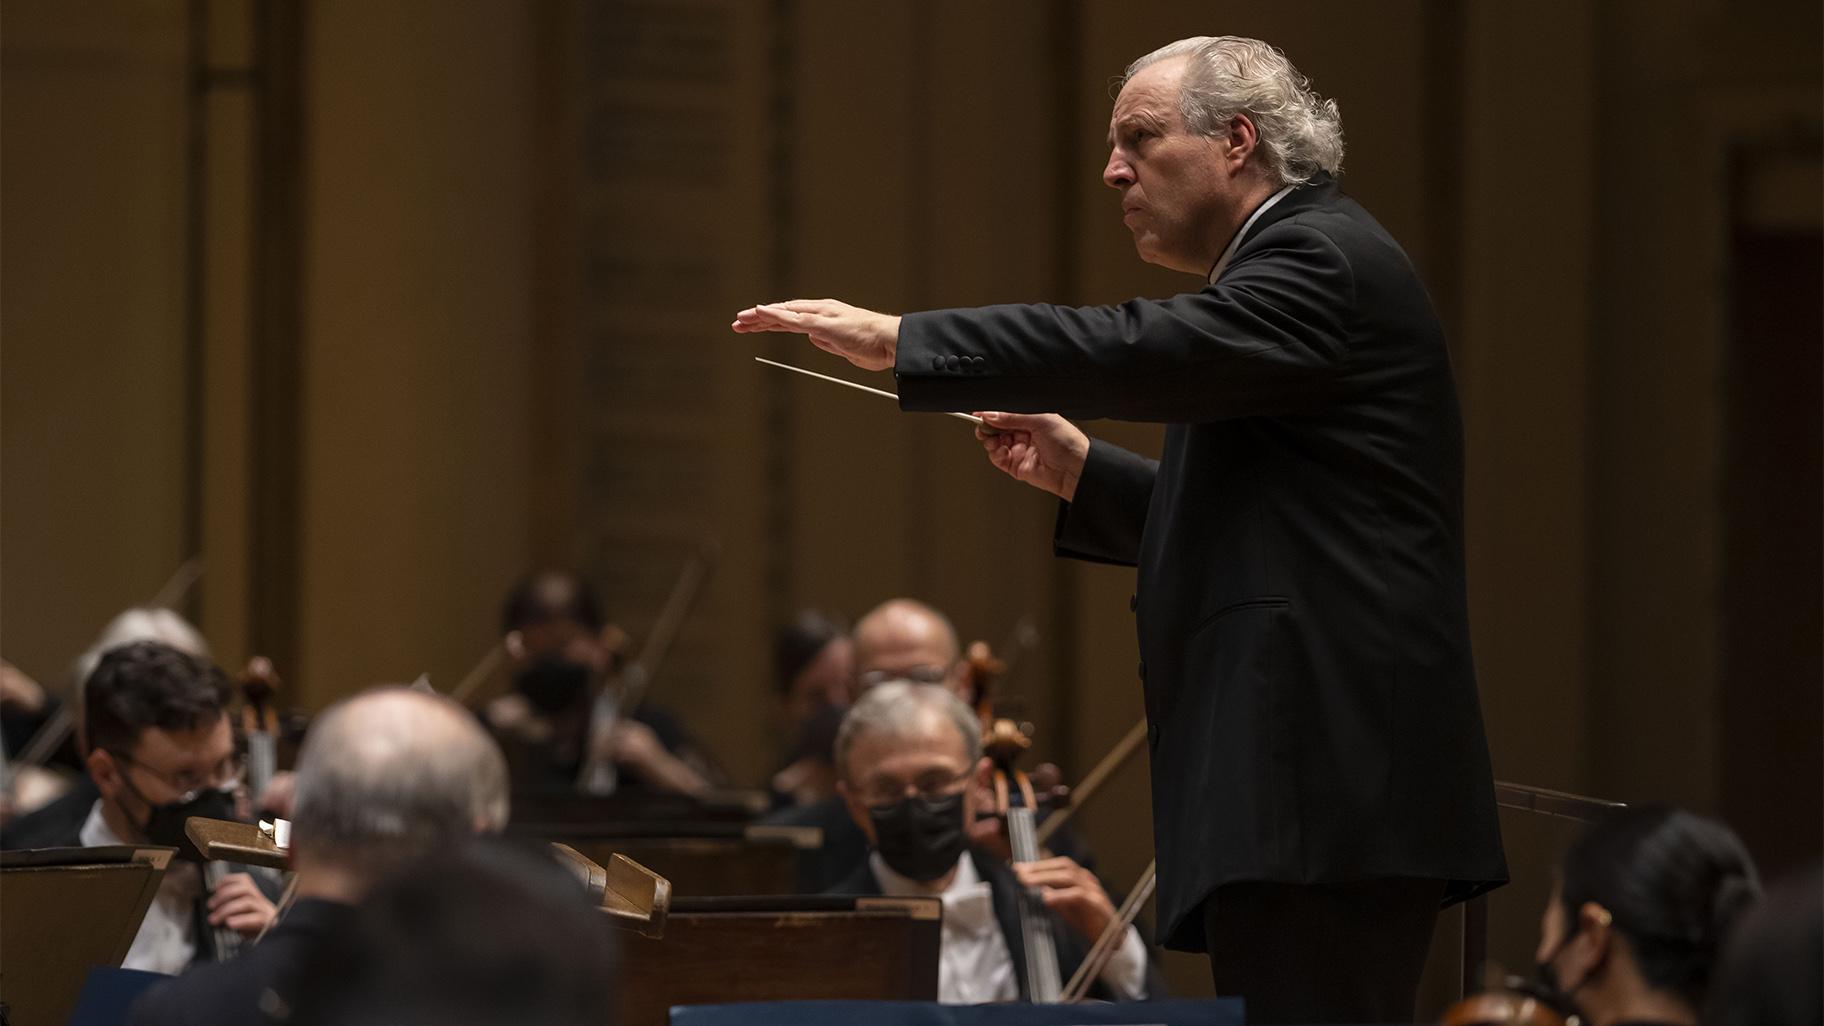 Guest conductor Manfred Honeck leads the Chicago Symphony Orchestra in Schubert’s Symphony No. 8 , Oct. 28, 2021. (Todd Rosenberg Photography)